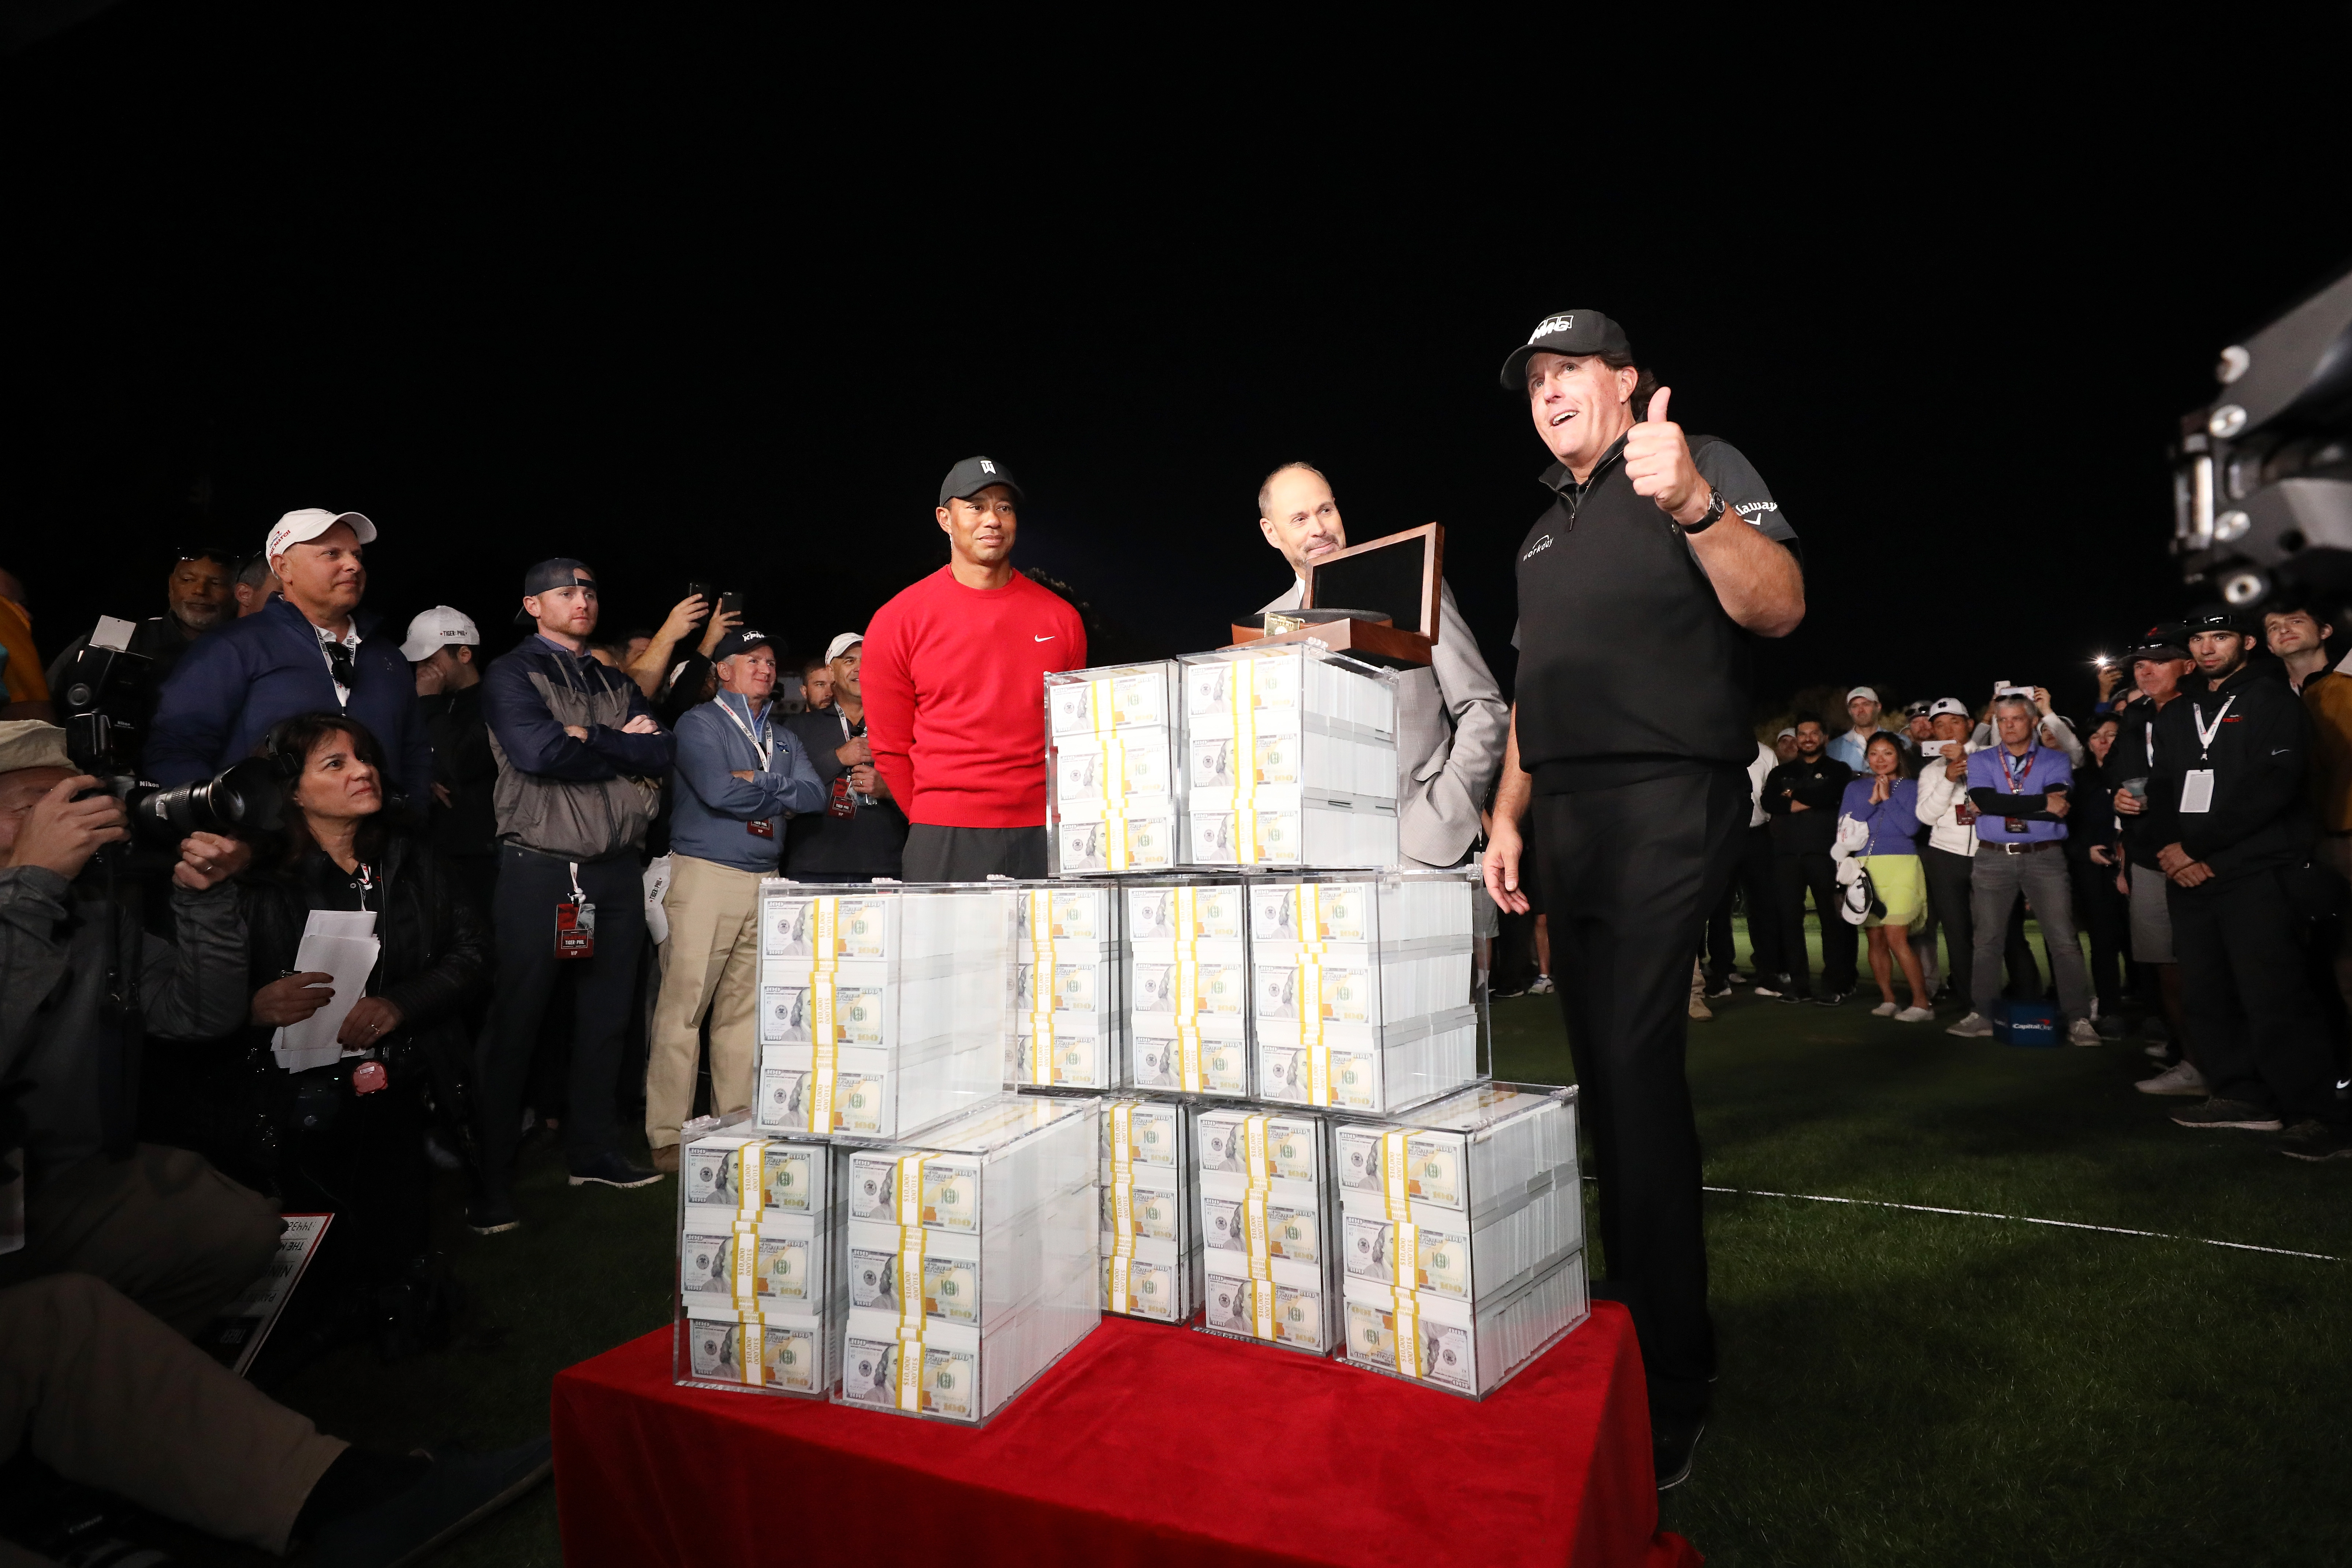 Golf Channels telecast of the 2020 CJ Cup to include live odds for the first time This is the Loop Golf Digest